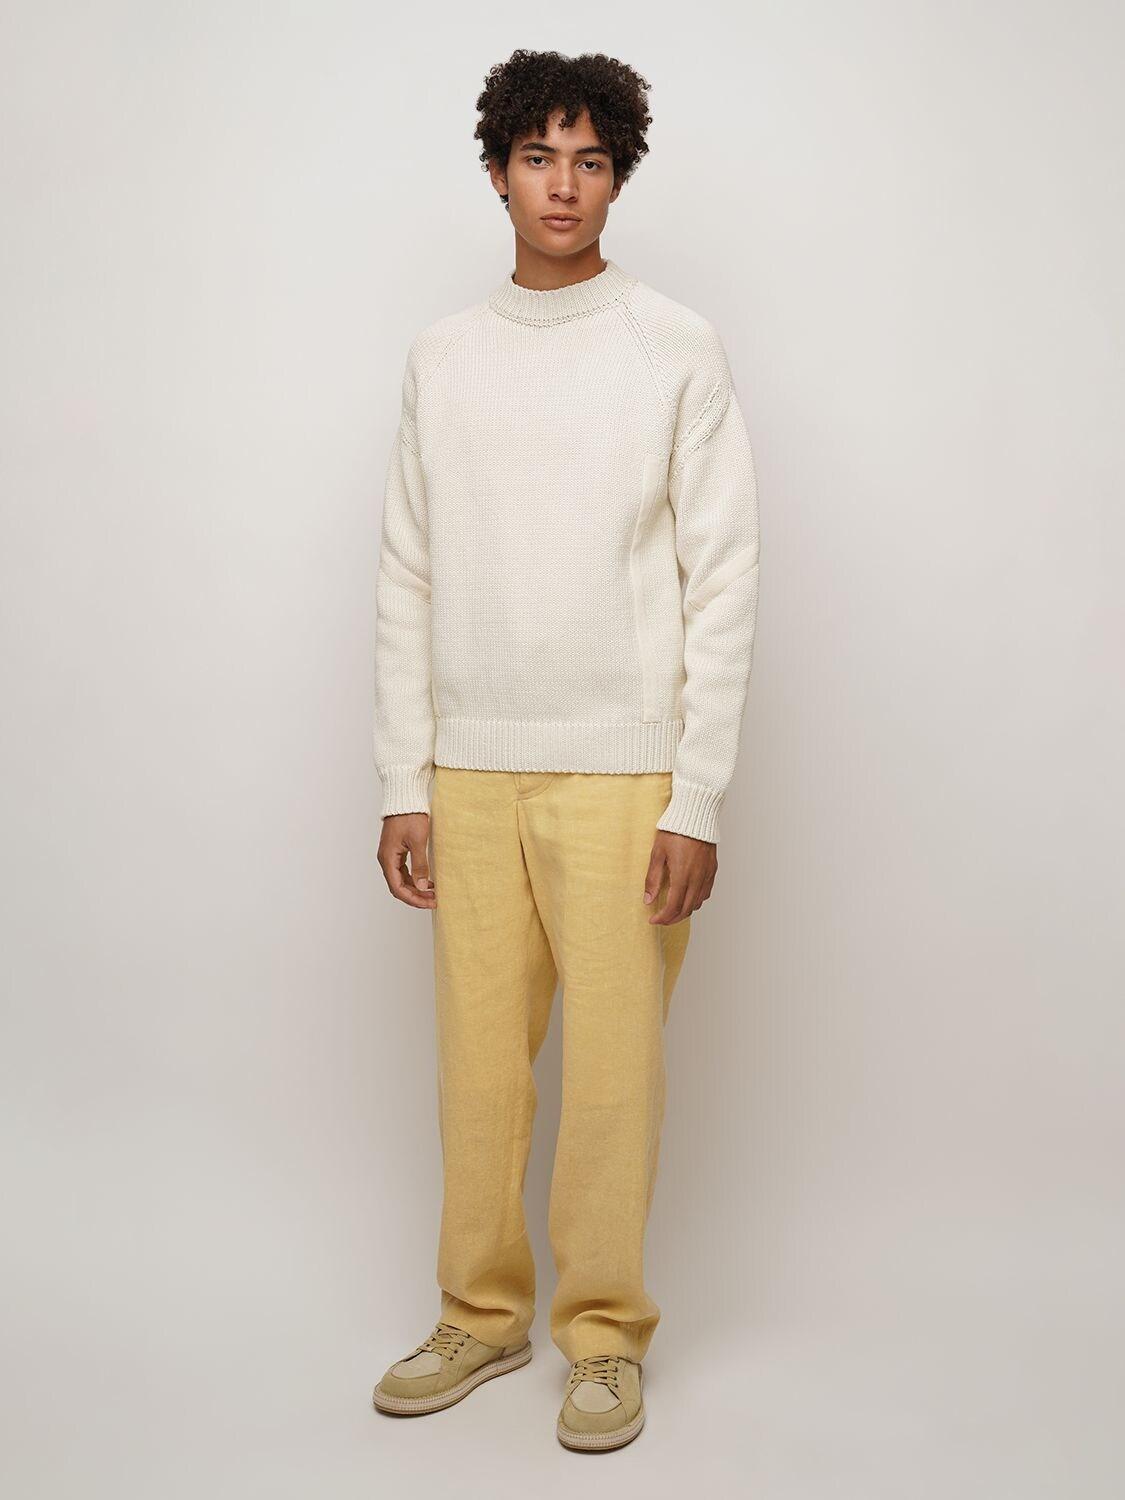 Jacquemus Le Pull Grain Cotton Knit Sweater in White for Men - Lyst